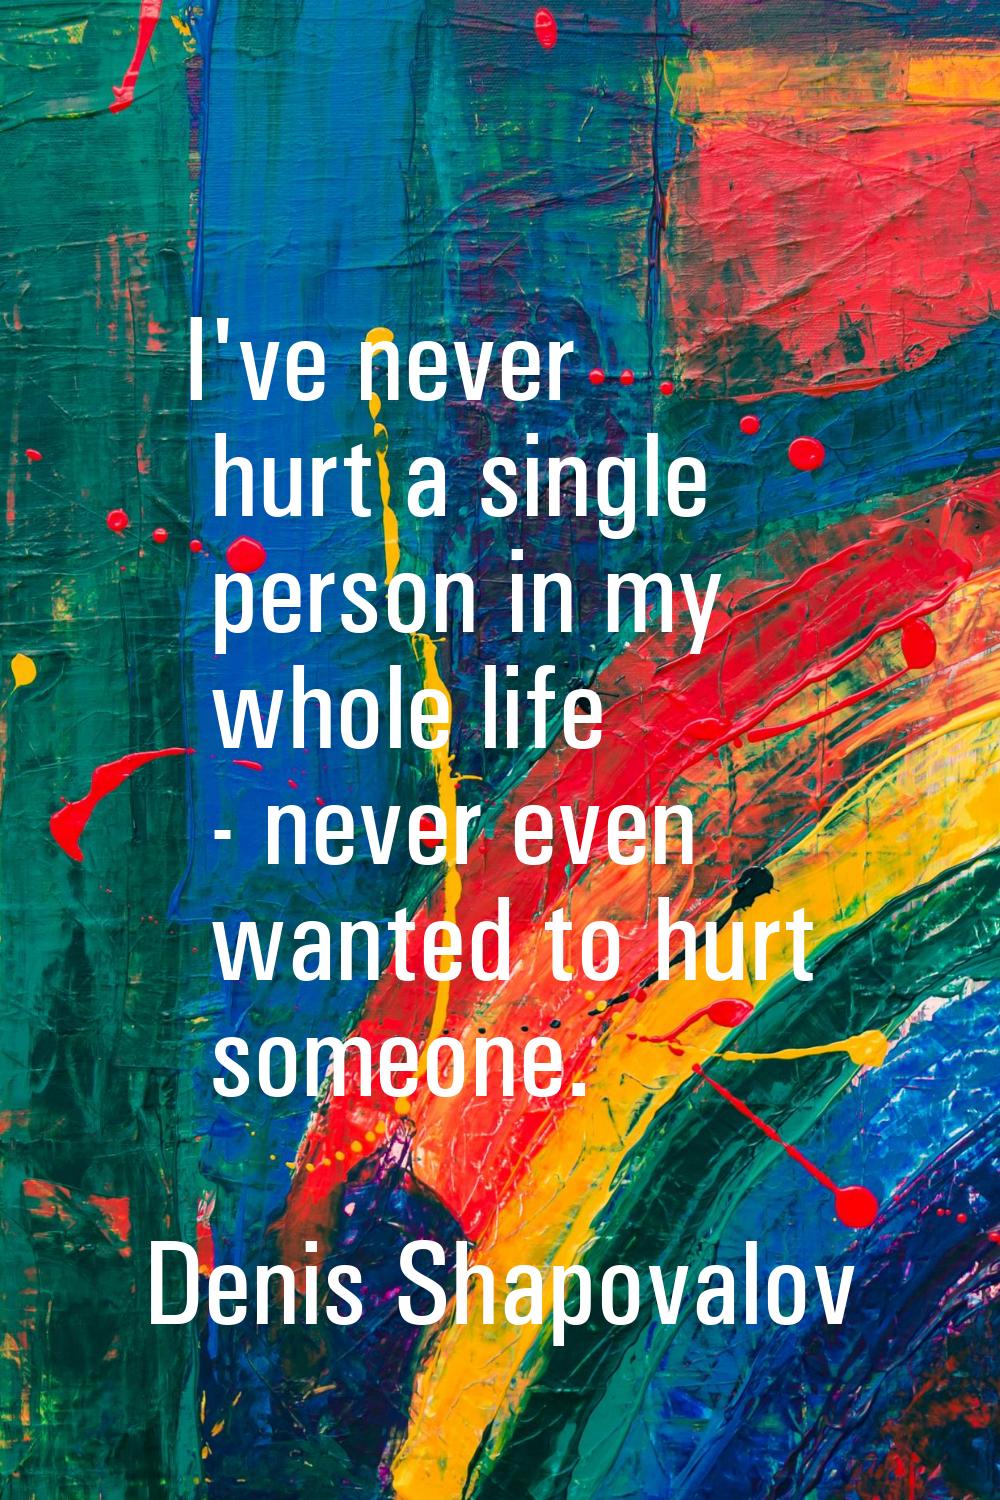 I've never hurt a single person in my whole life - never even wanted to hurt someone.